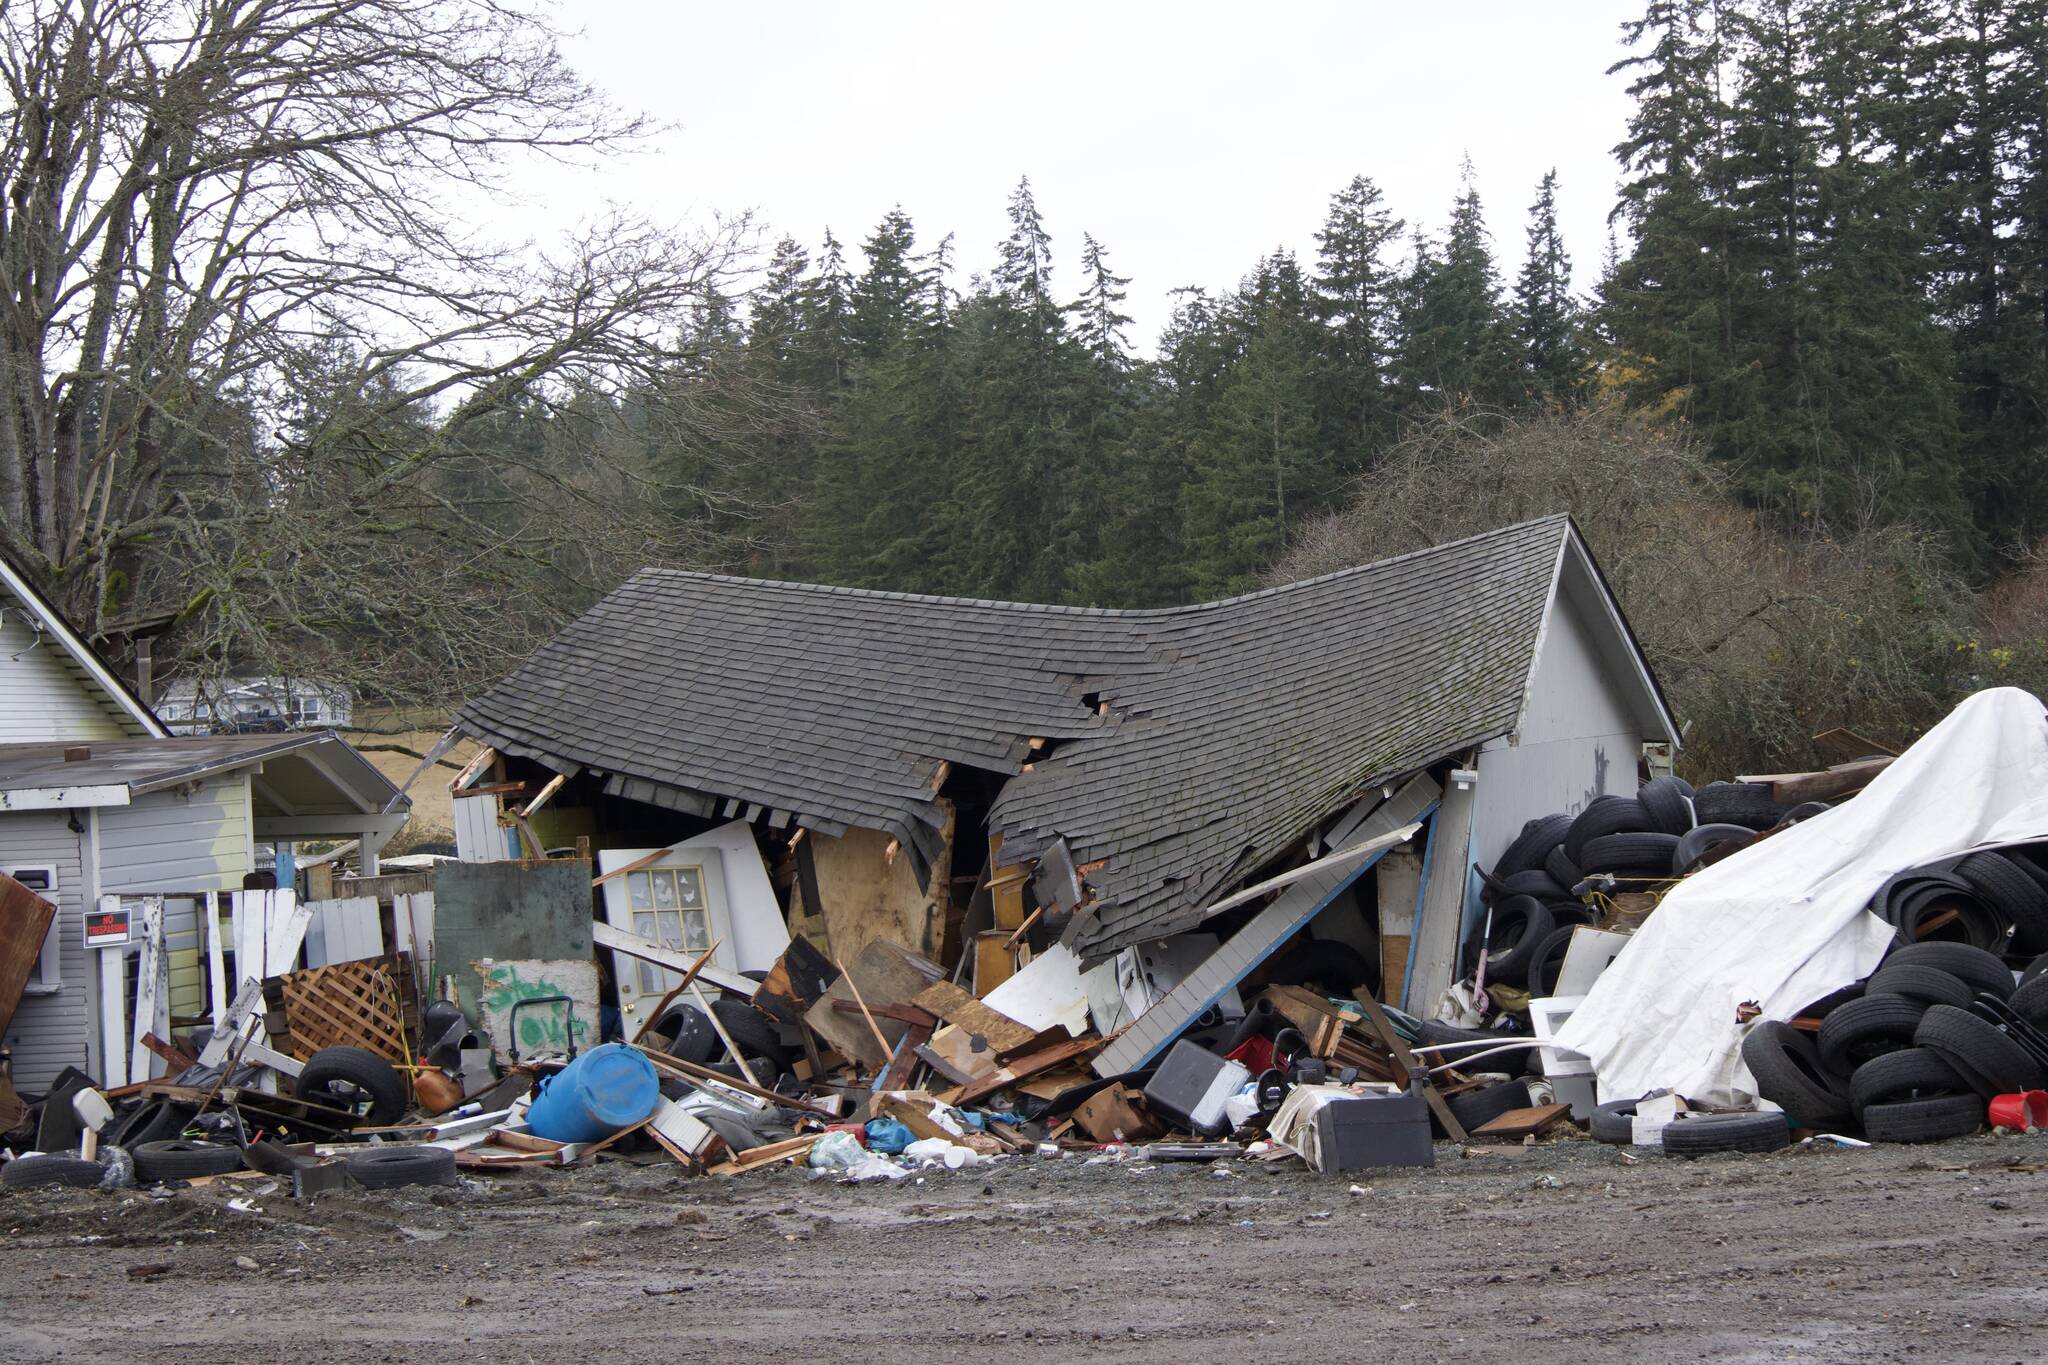 Photo by Rachel Rosen/Whidbey News-Times
Tires, bicycles and vehicles are among the garbage that has been dumped on the North Whidbey property.